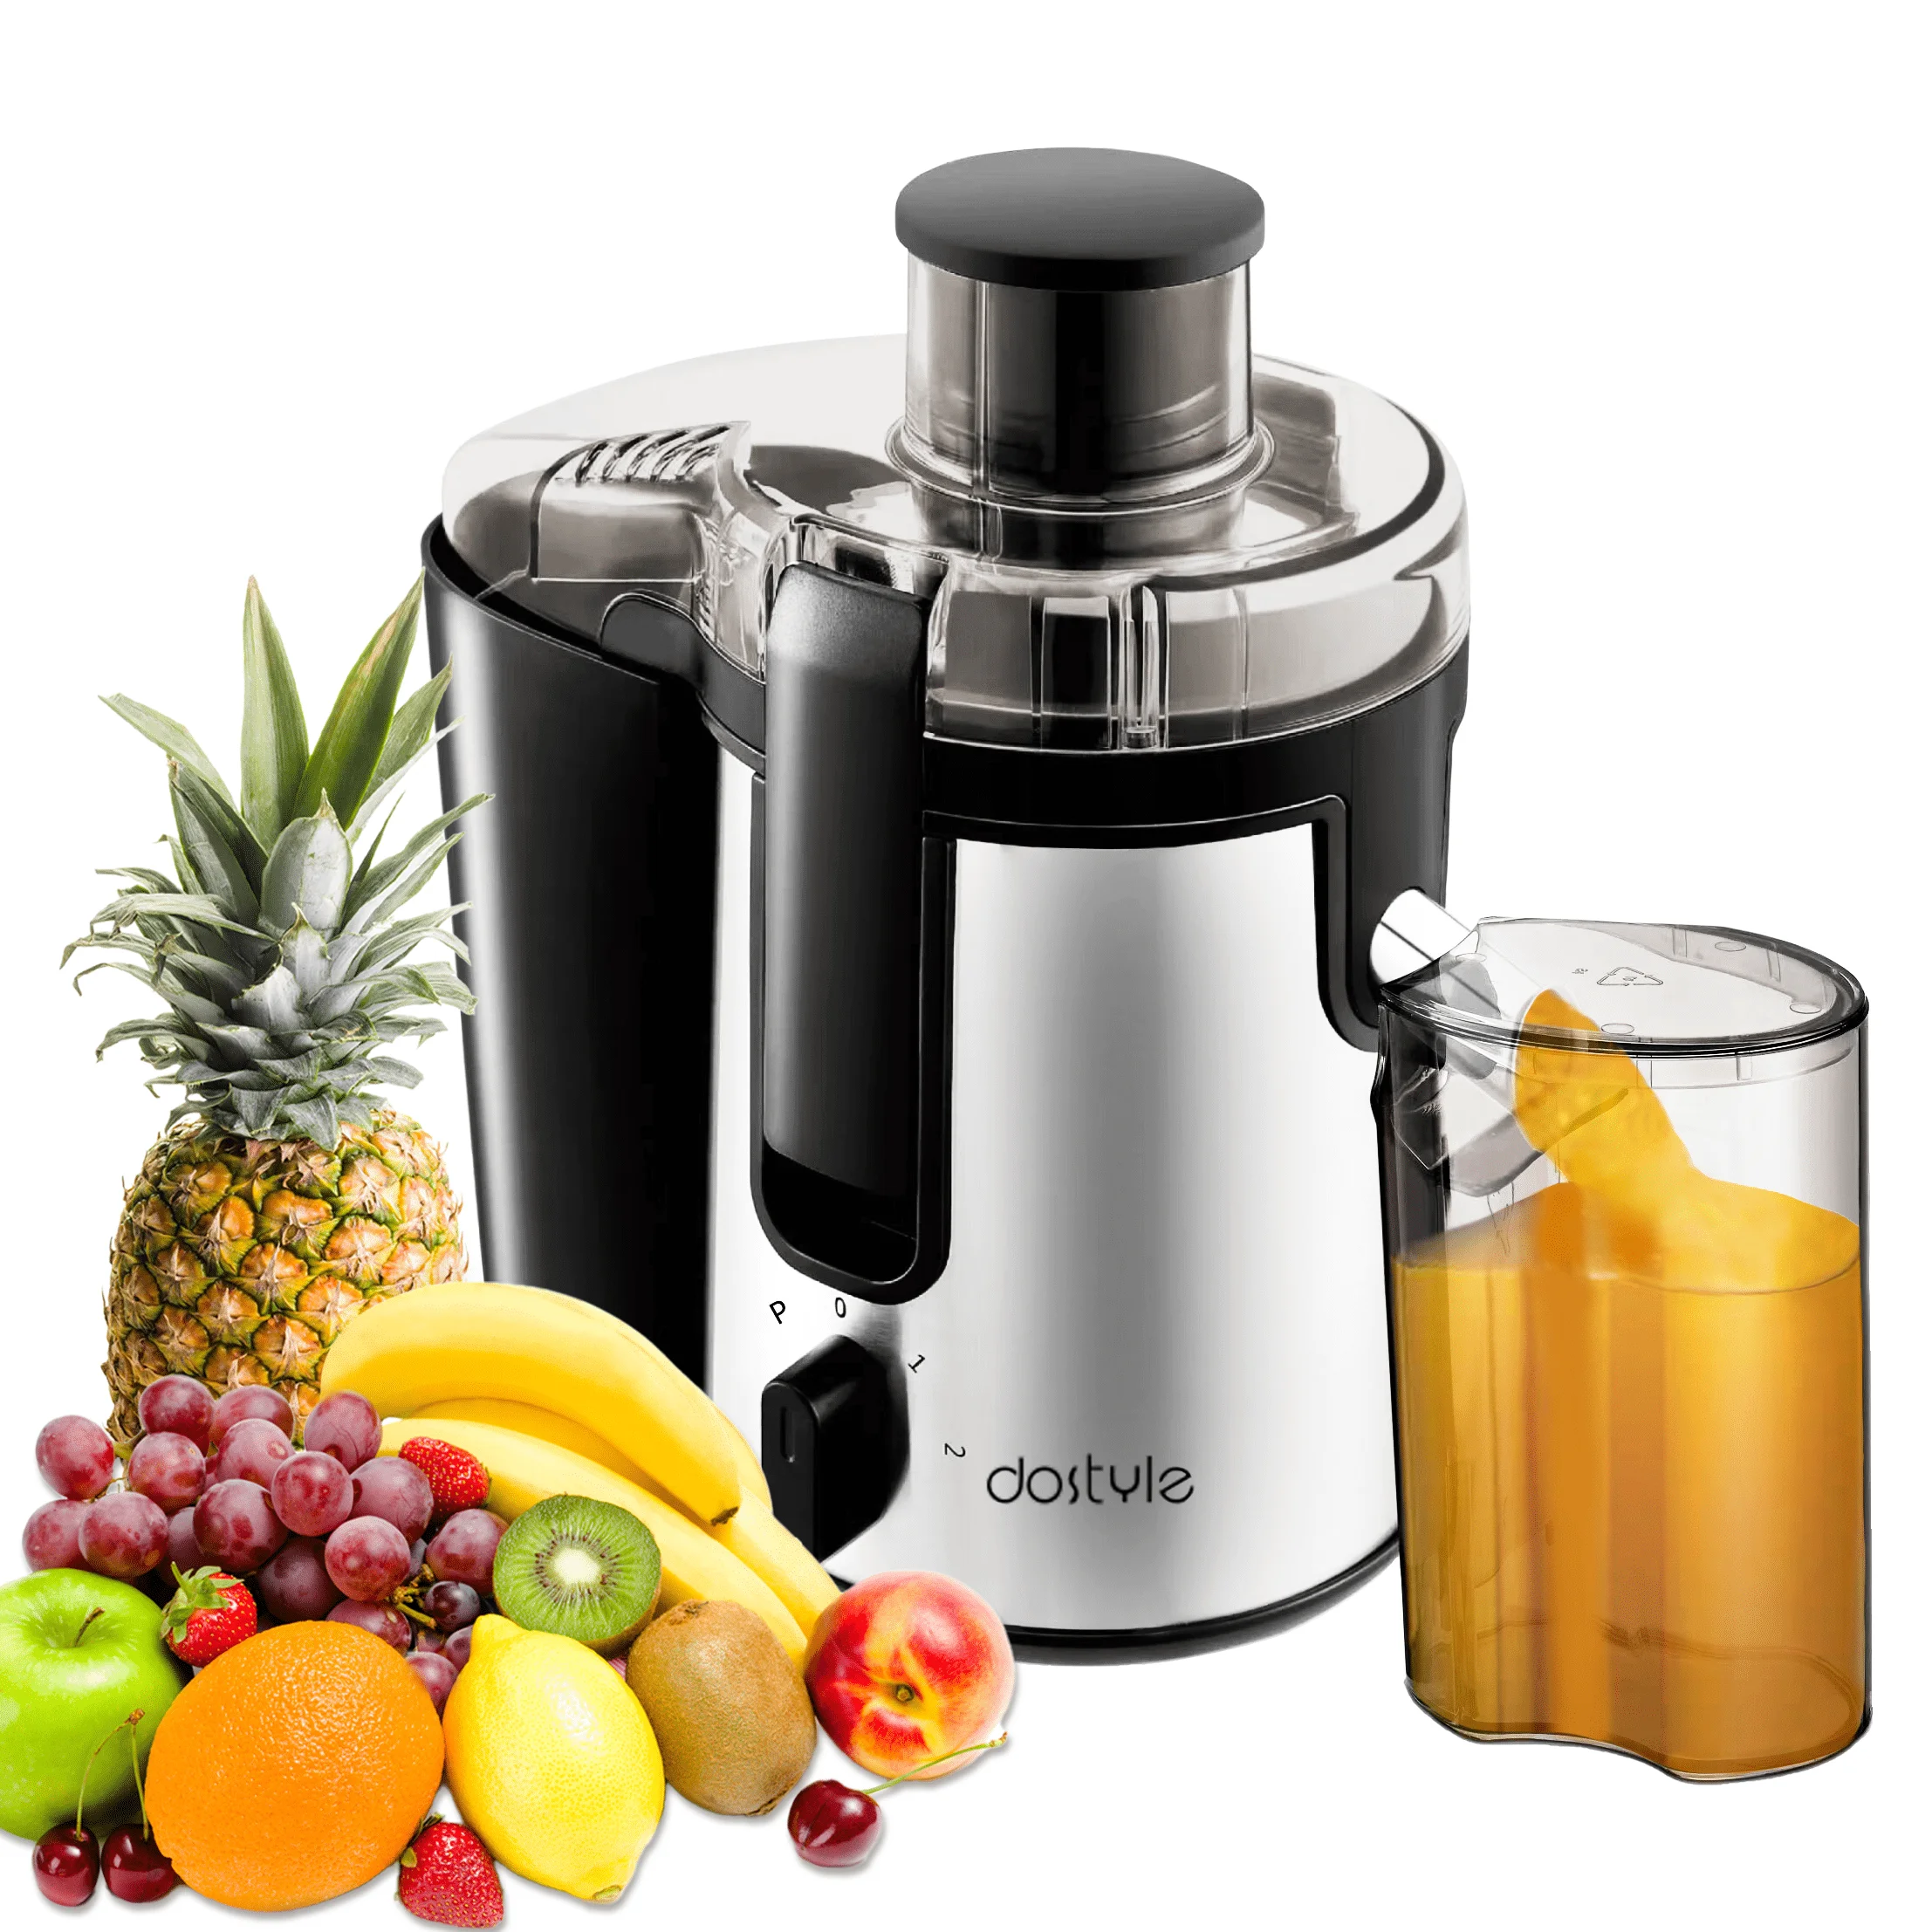 

Juicer Machines, Slow Masticating Juicer 2 Speeds,Stainless Steel Juicer Extractor with Higher Juice Yield, Anti-drip Function D